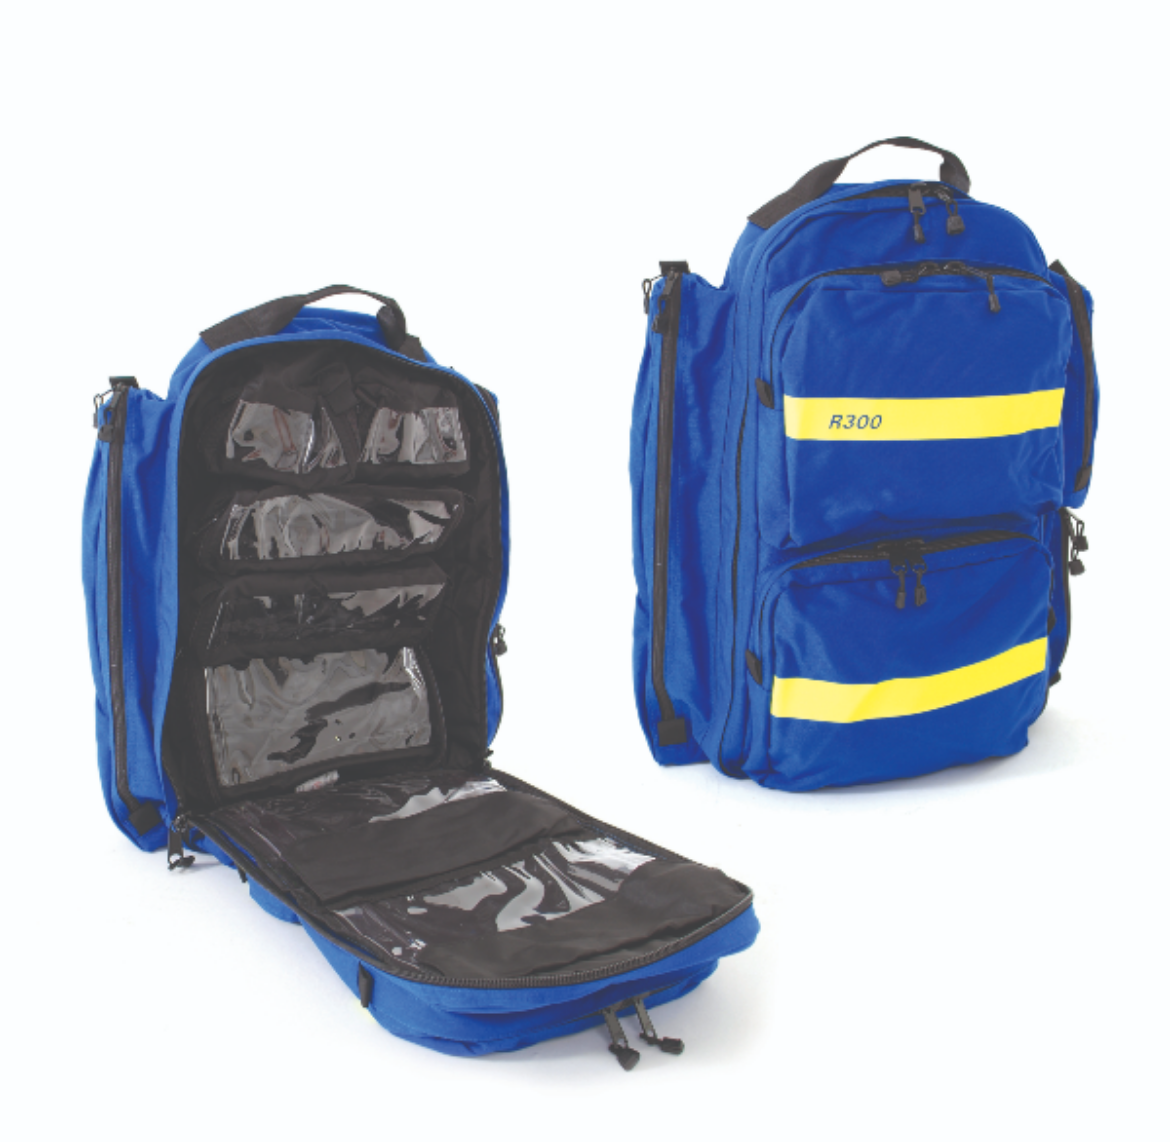 Picture of FERNO PARAMEDIC RESCUE BACKPACK R300 BLUE